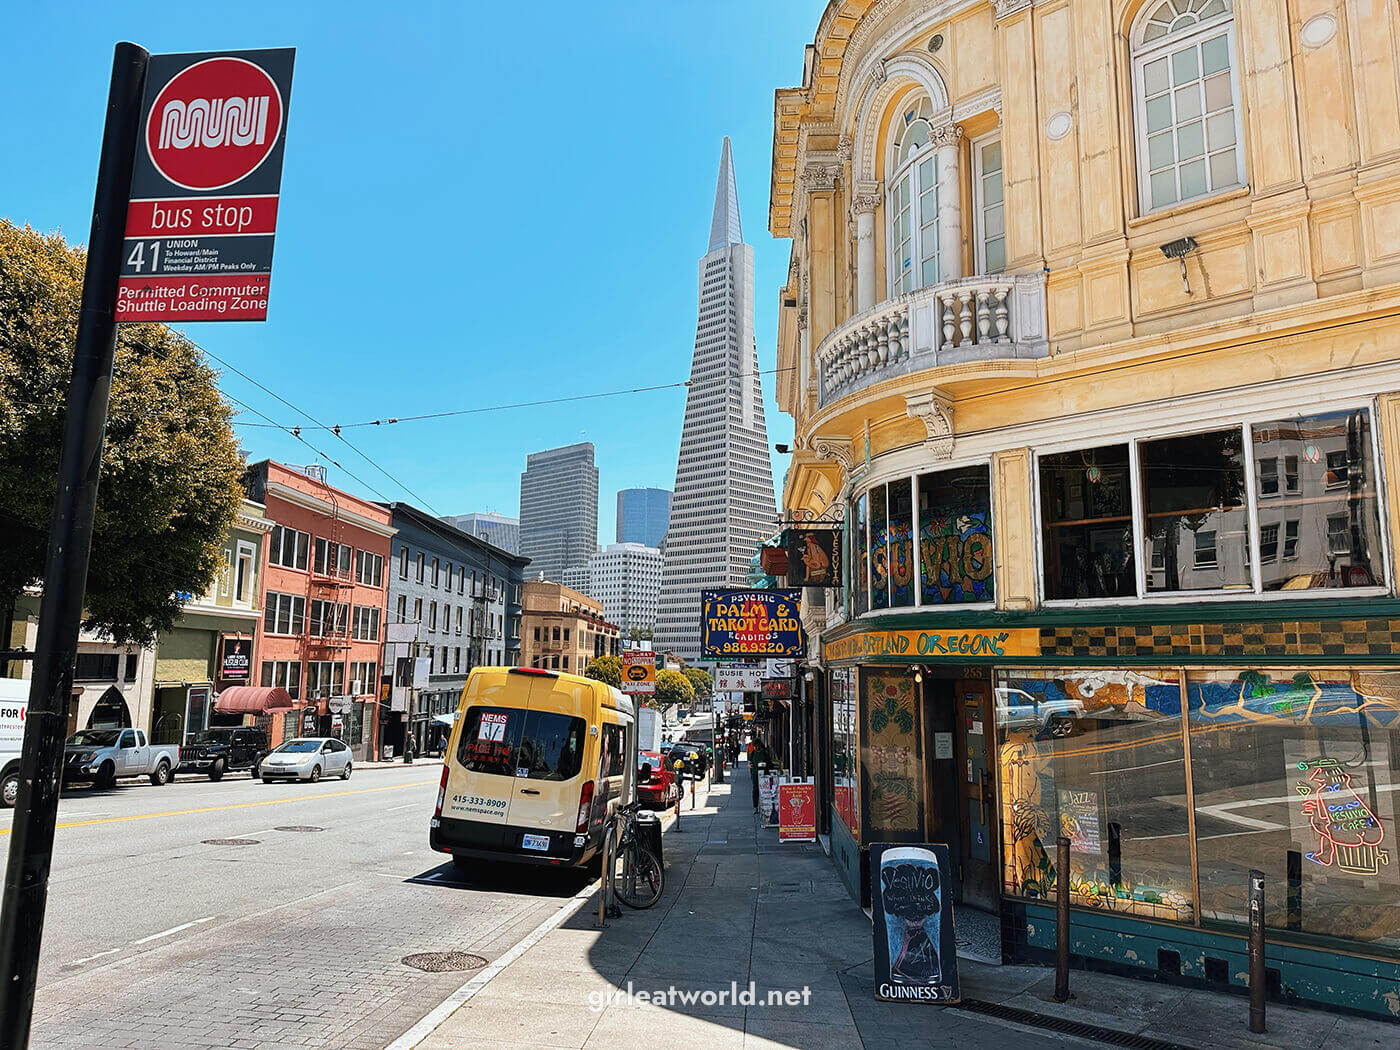 San Francisco Itinerary - Panamericana building from the San Francisco North Beach district